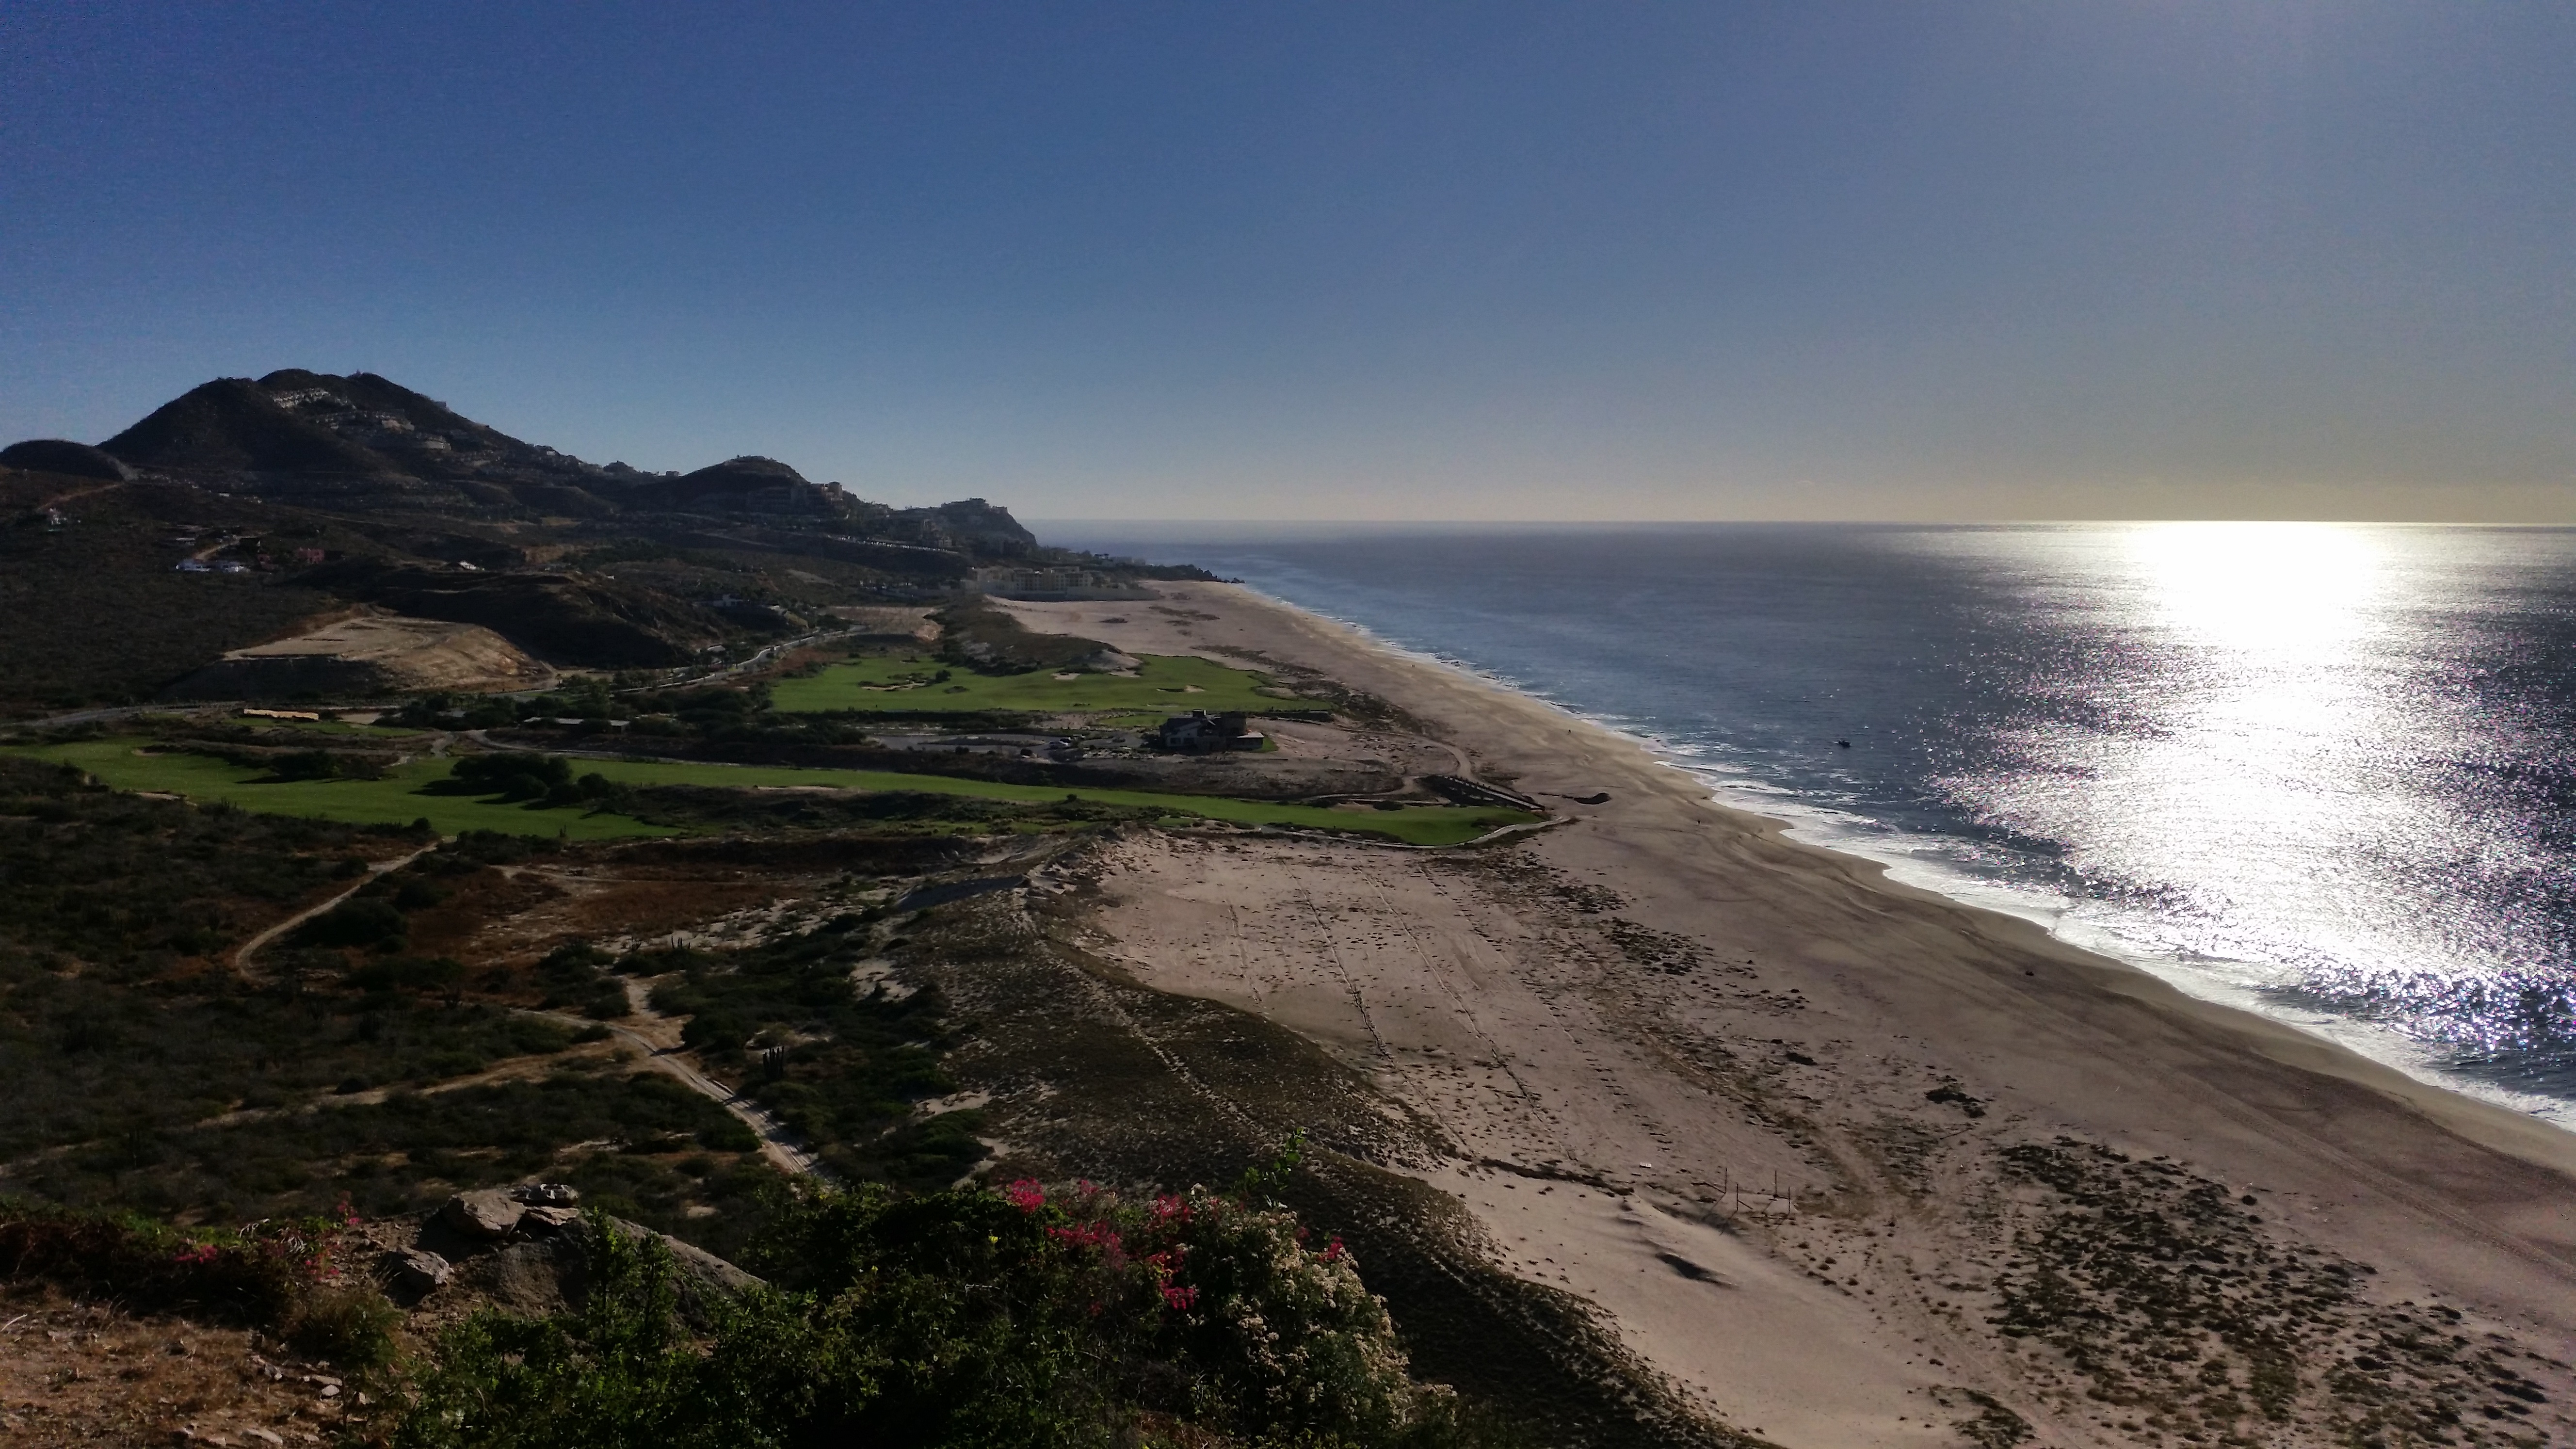 Quivira - A picturesque view from the course